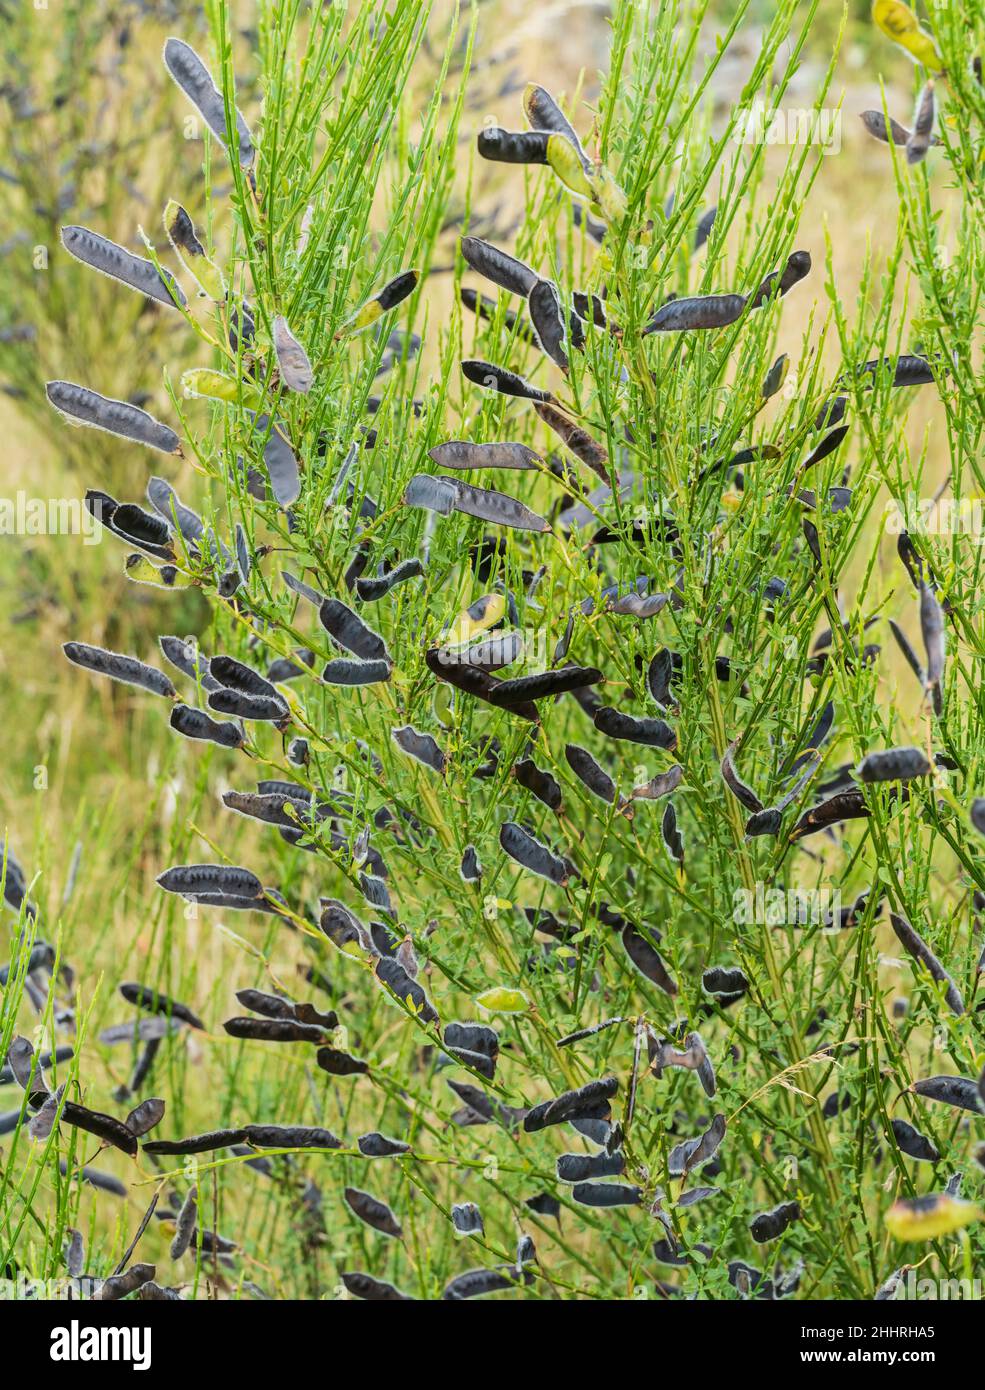 Hawick, Scottish Borders - on Galalaw hill. Broom seed pods. Stock Photo